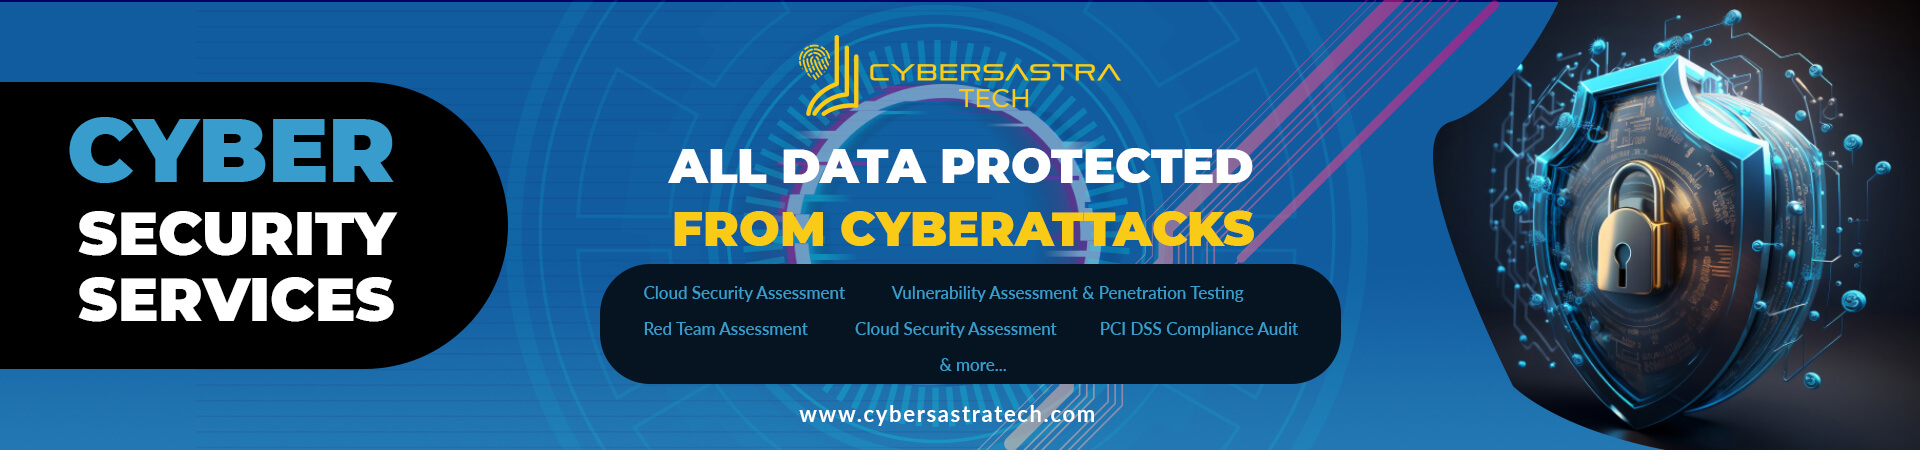 Cybersastra Tech - Cyber Security Service Provider In Nepal 